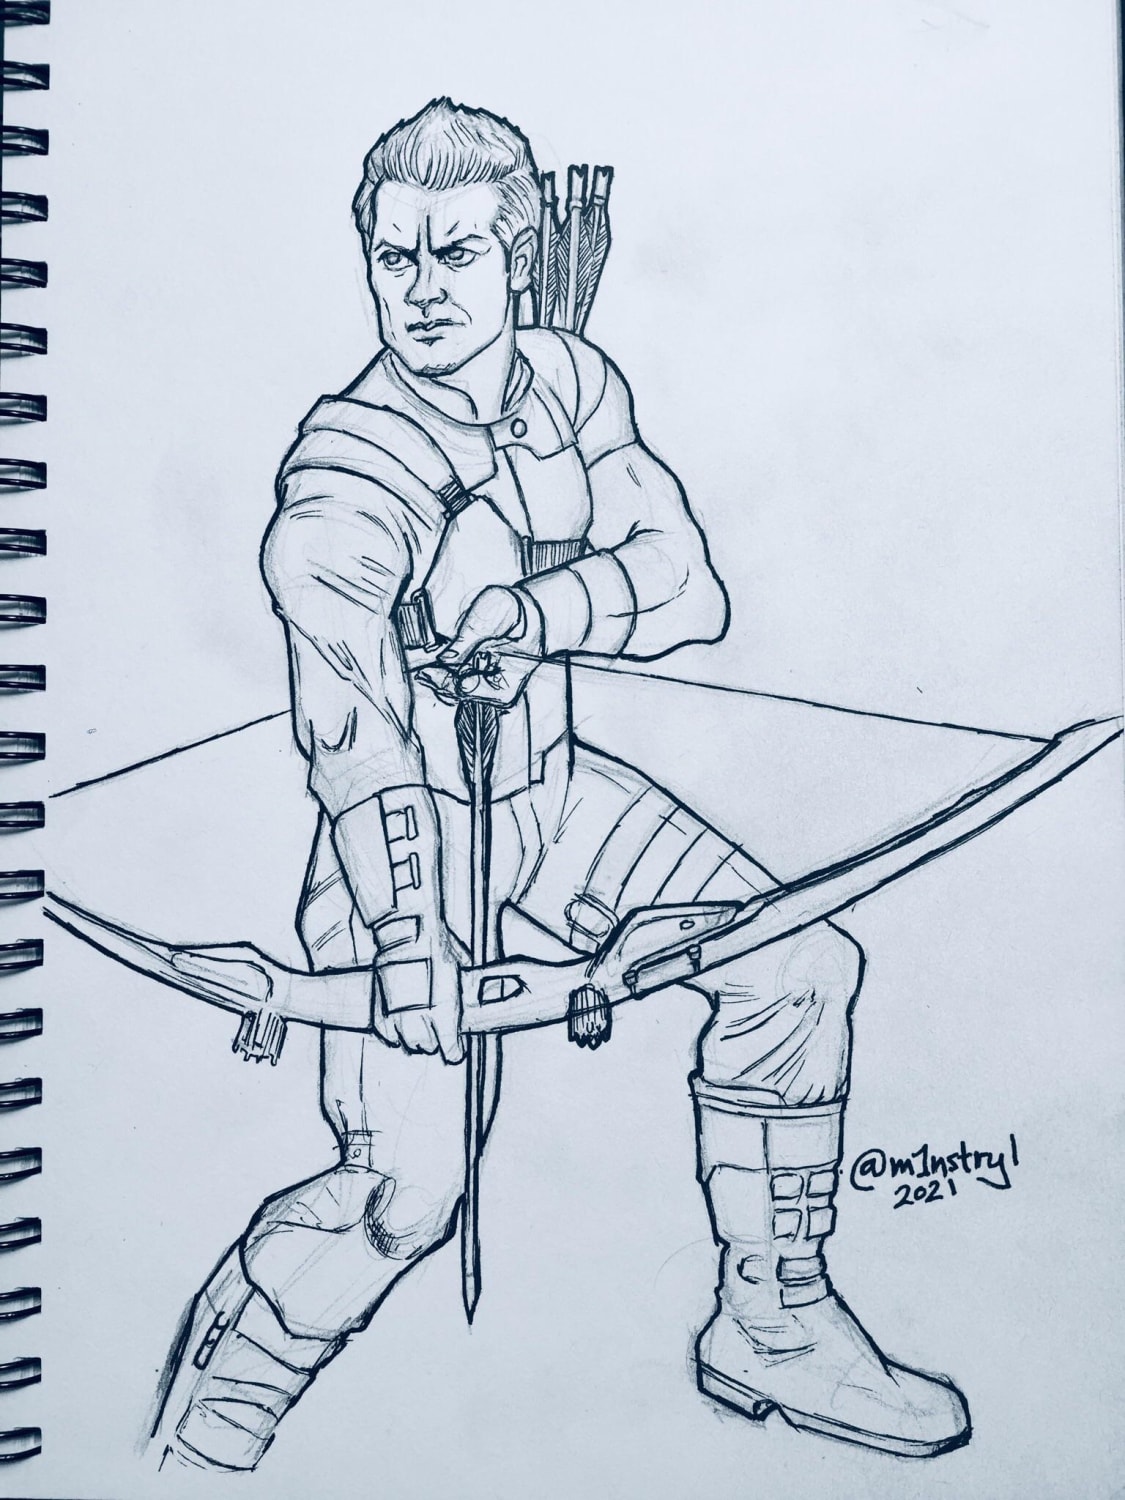 Today, my son asked me to draw Hawkeye.